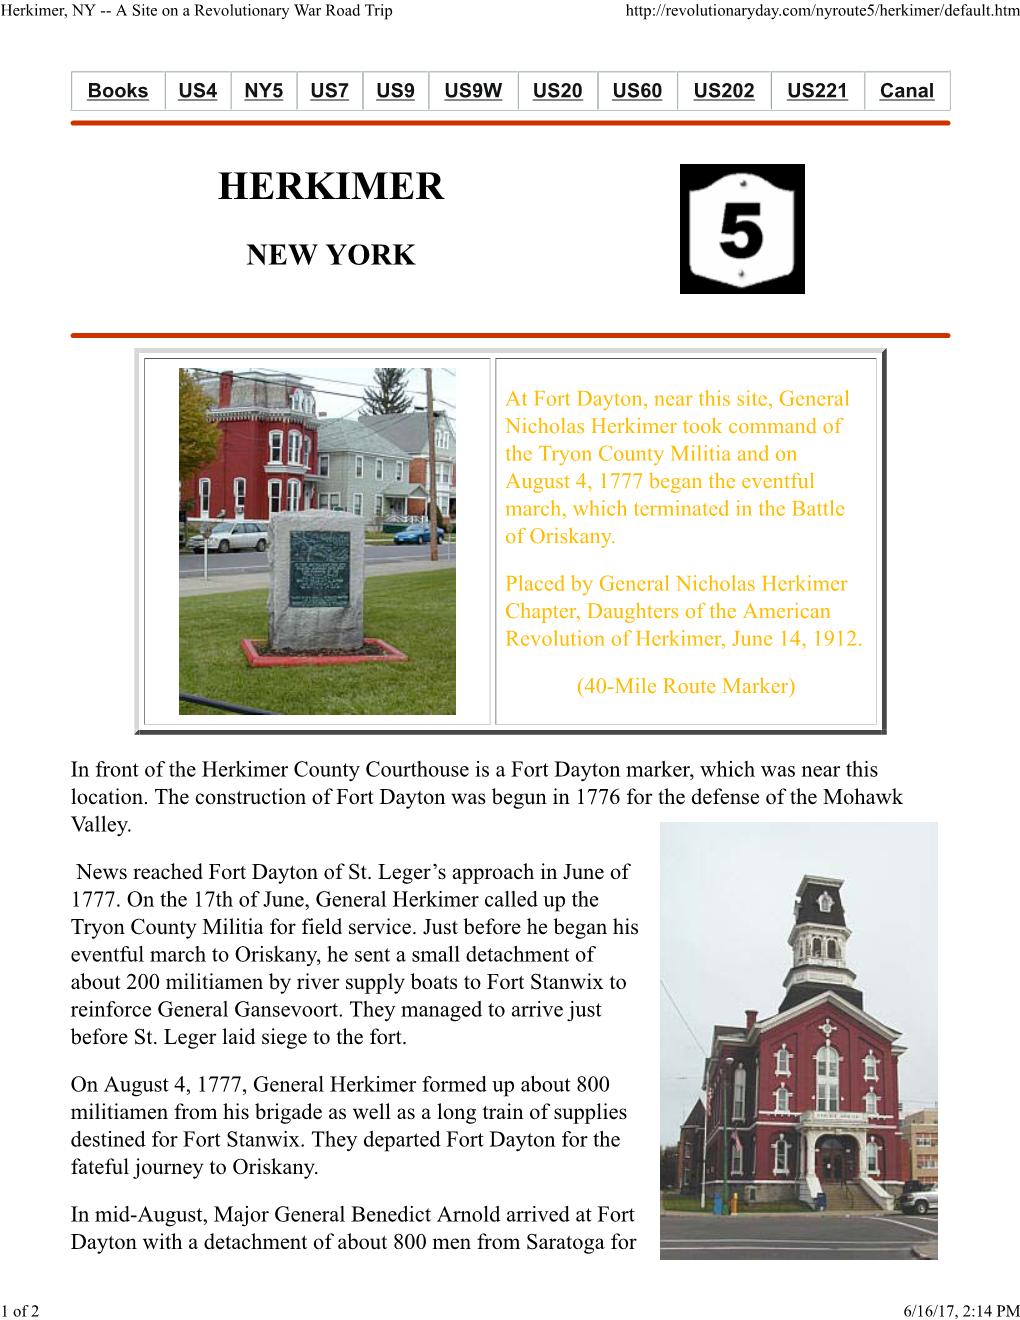 Herkimer, NY -- a Site on a Revolutionary War Road Trip